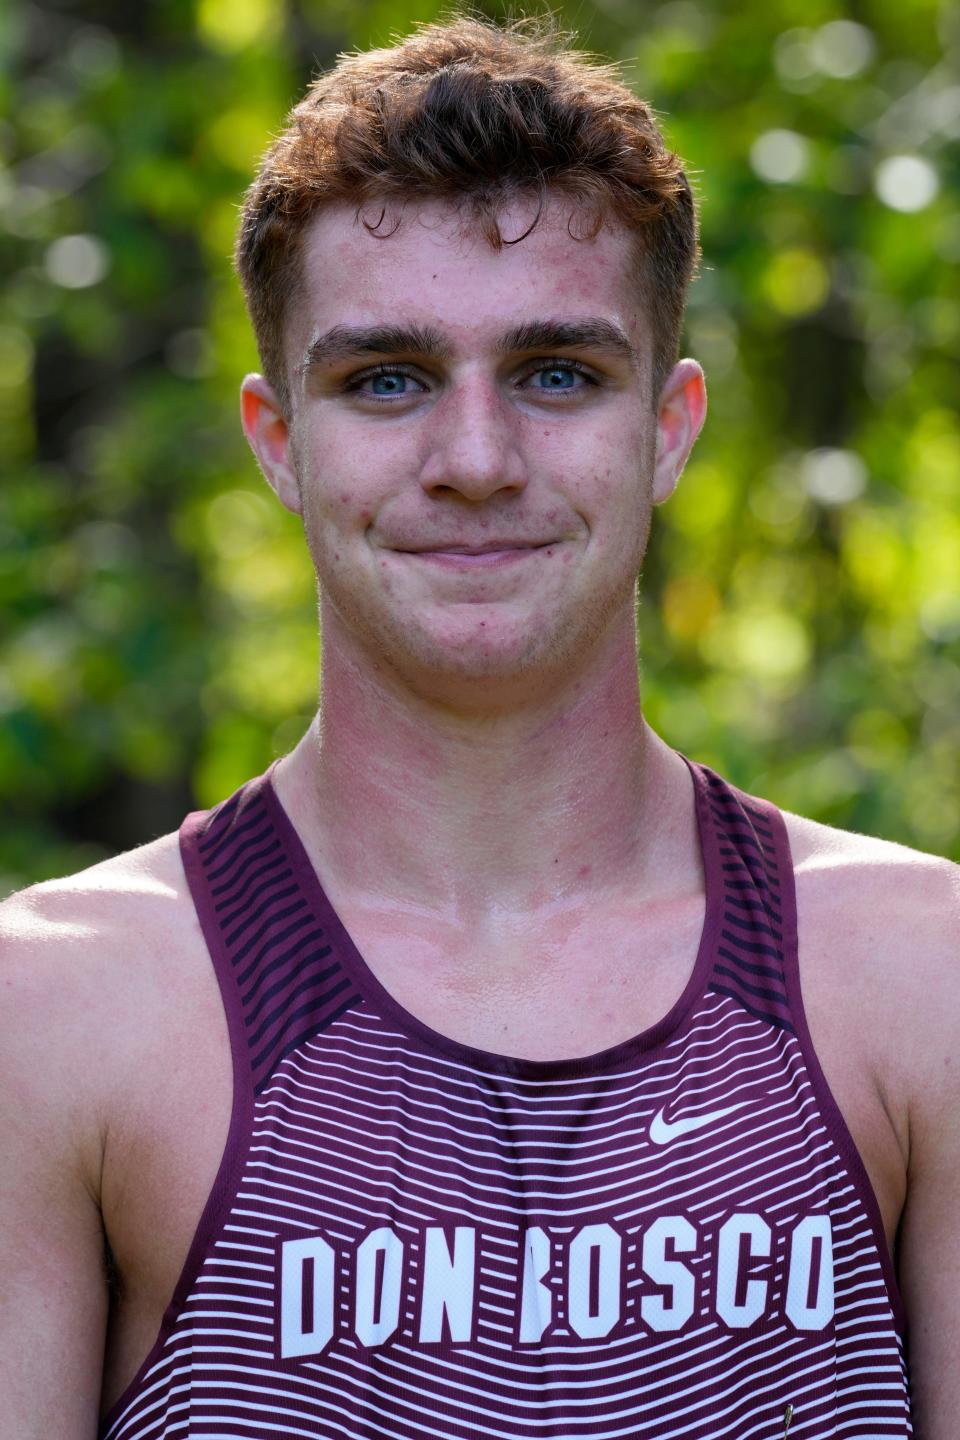 Ryan LoCicero, of Don Bosco Prep, came in second place in the United race with a time of 16:19. Thursday, September, 29, 2022